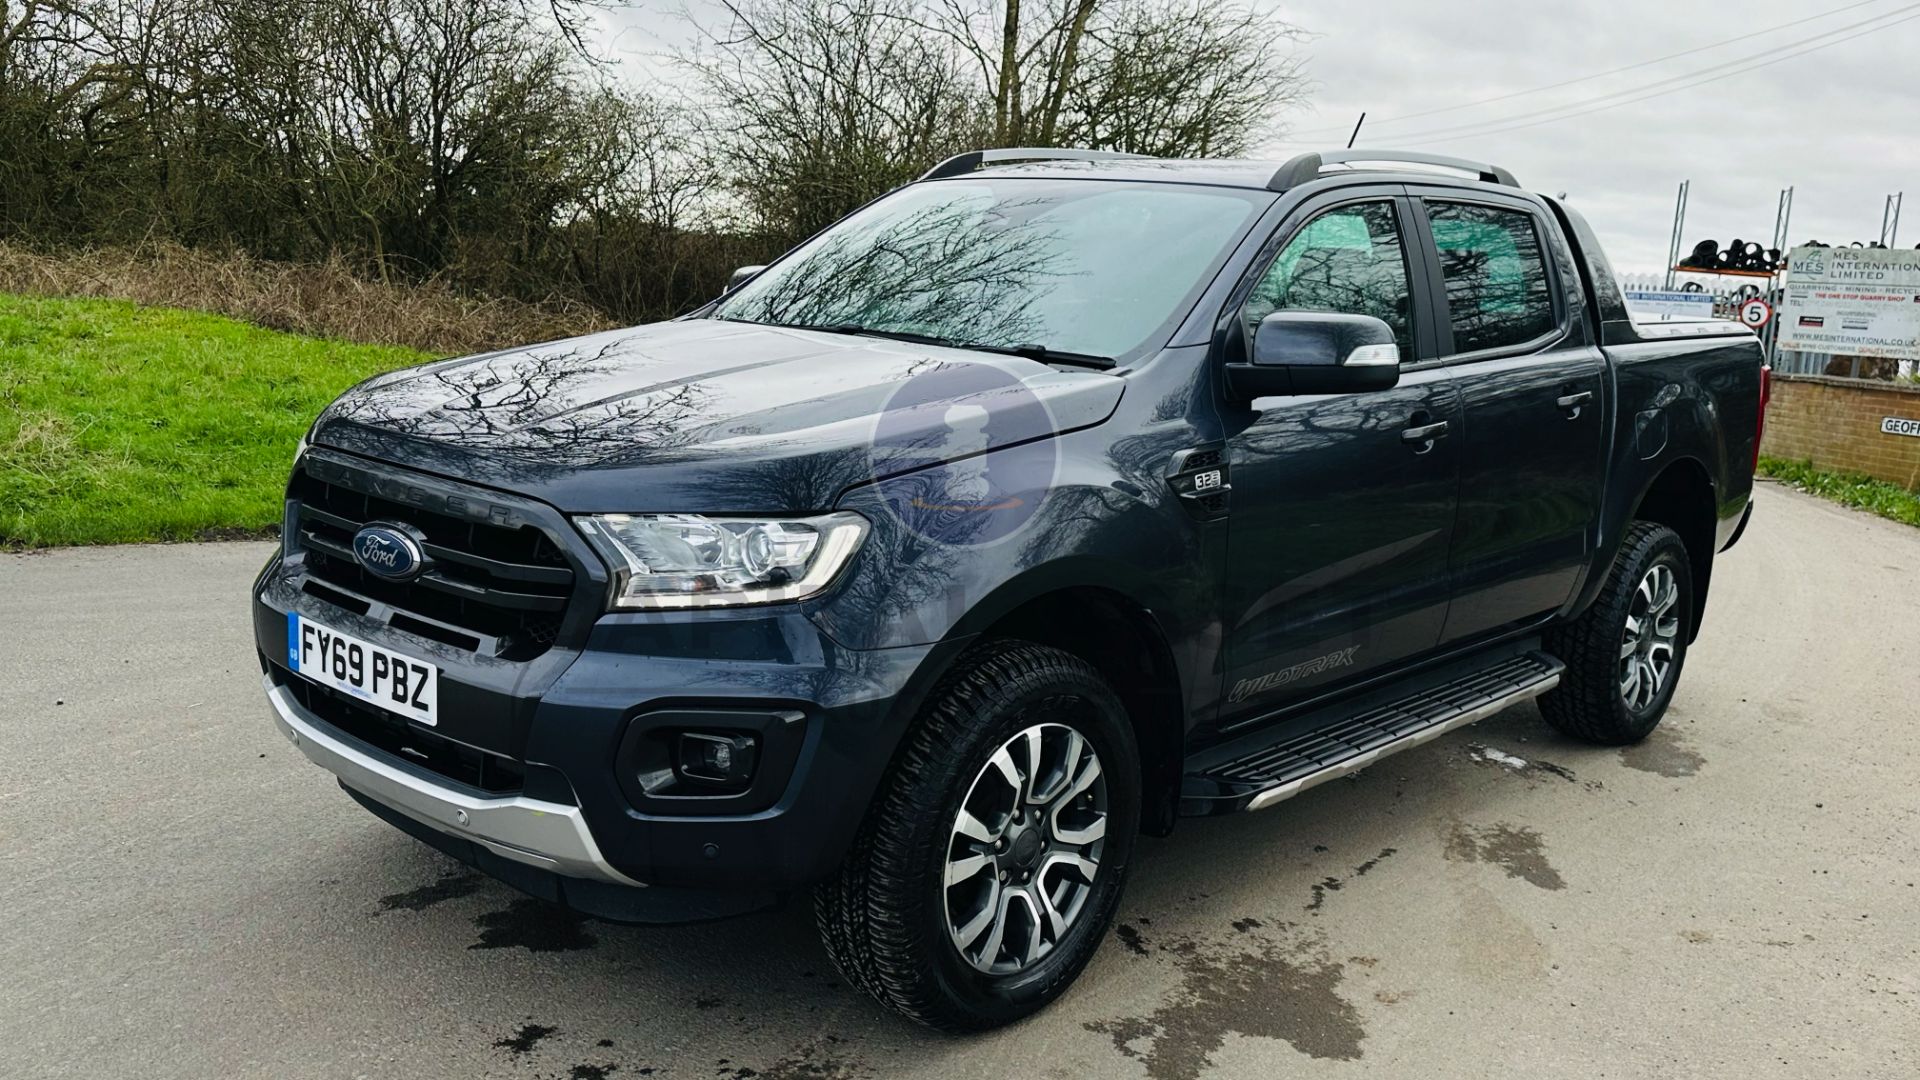 FORD RANGER *WILDTRAK EDITION* DOUBLE CAB PICK-UP (2020 - EURO 6) 3.2 TDCI - AUTOMATIC *HUGE SPEC* - Image 5 of 49